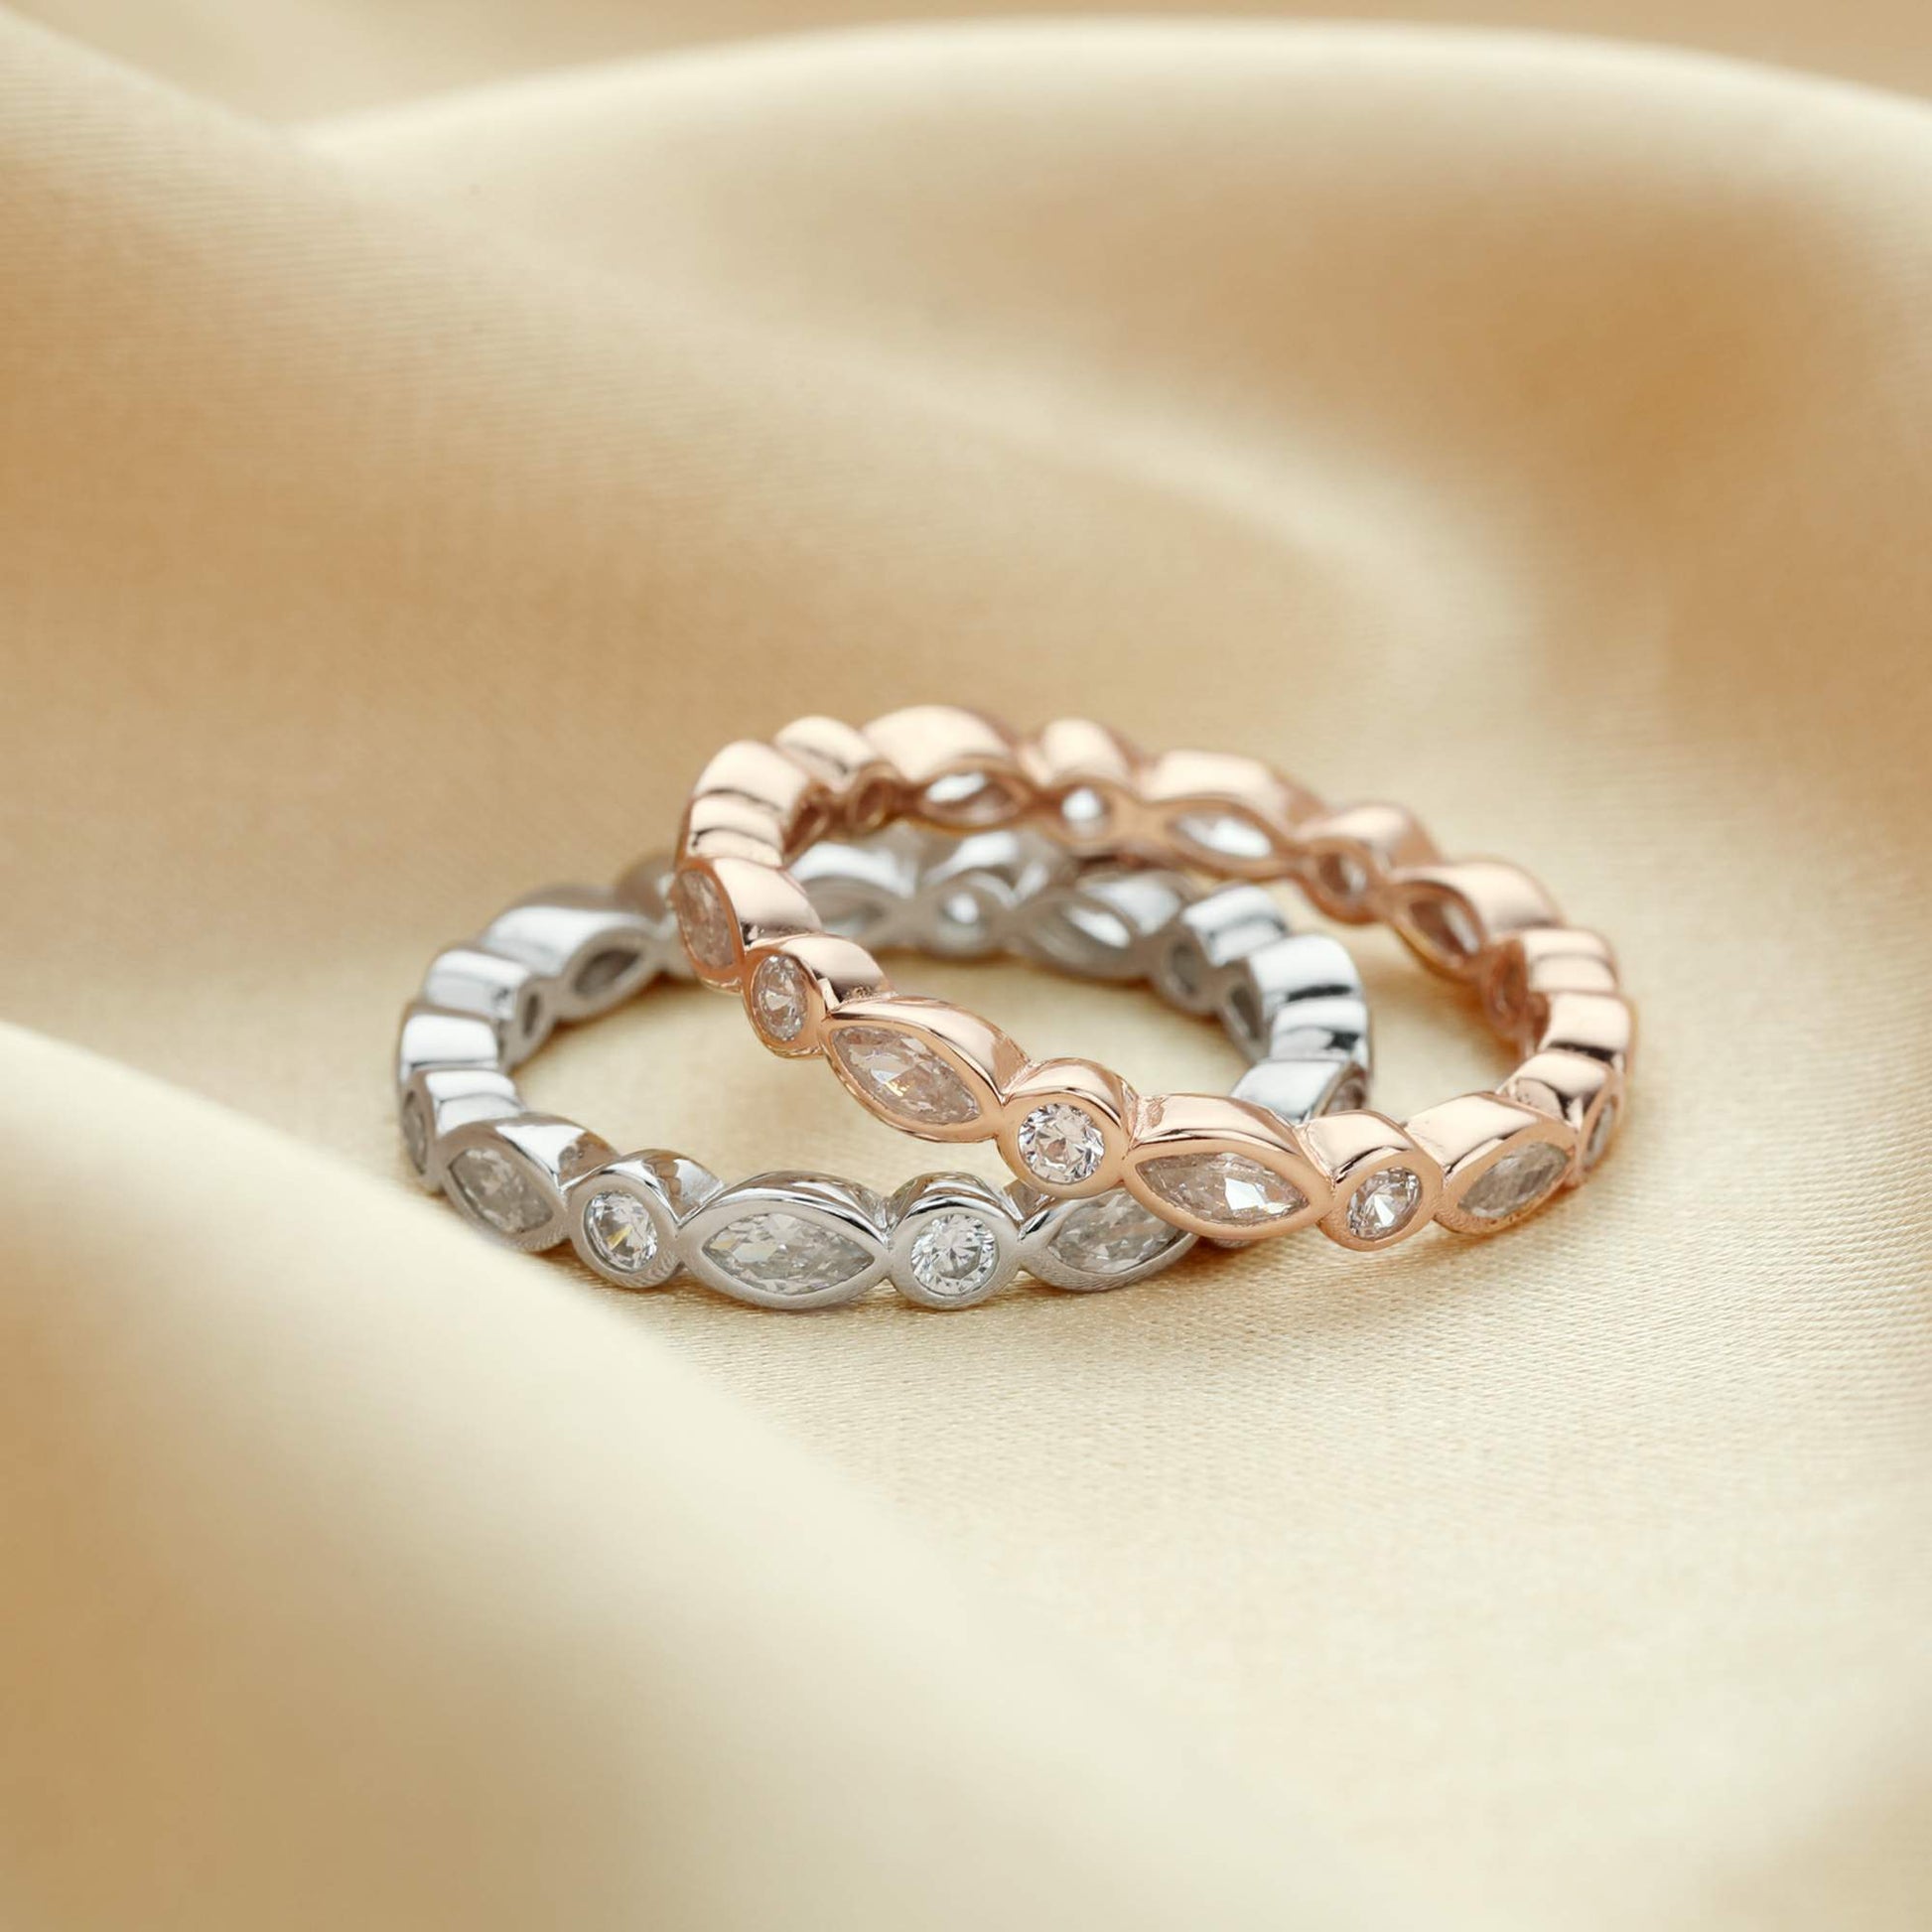 One silver and one rose gold ring bezel set with alternating marquise and round cut clear gems.